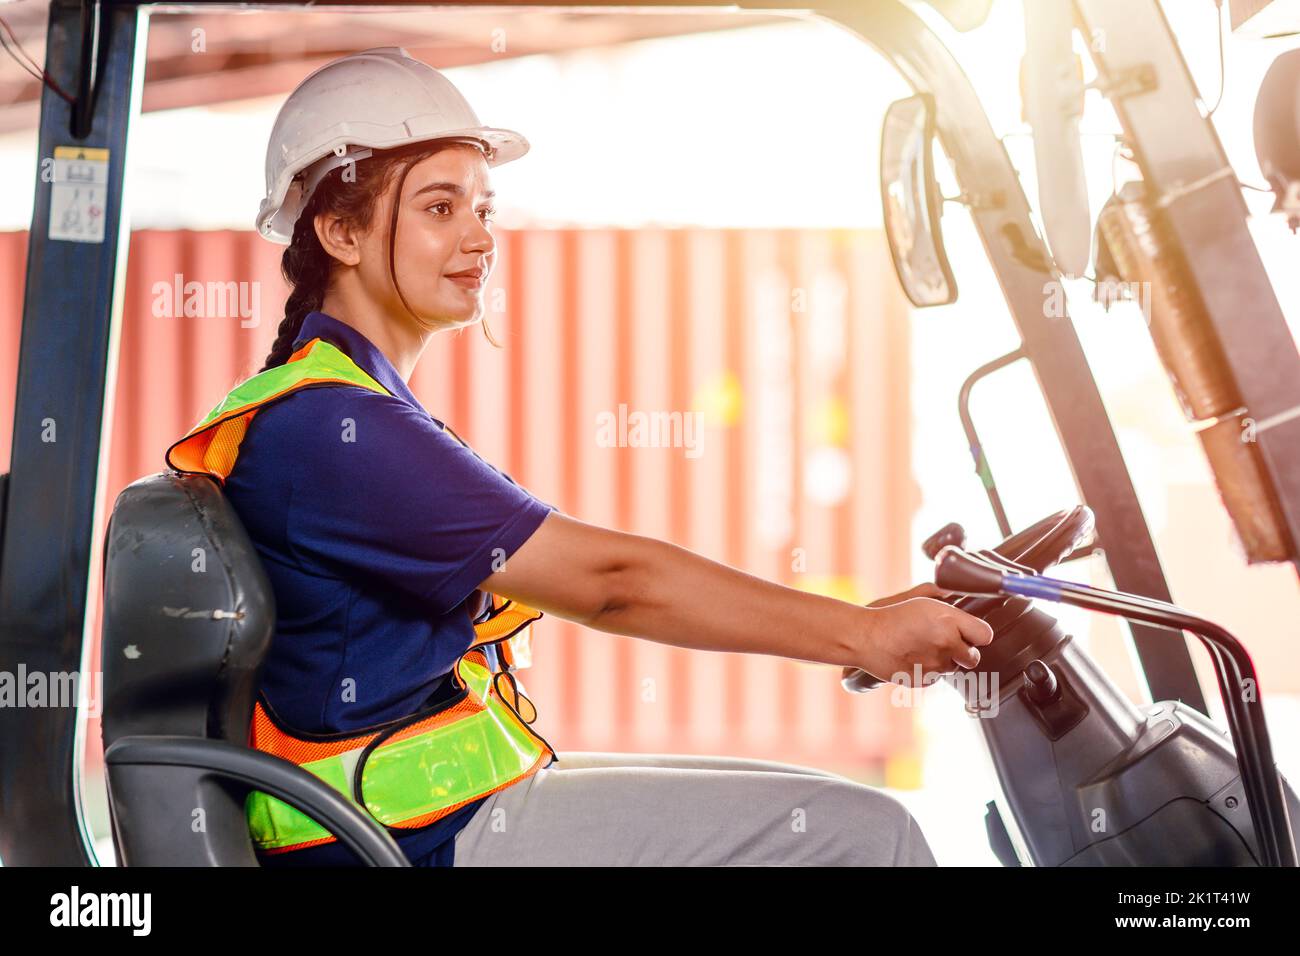 female forklift operator working in a warehouse. Portrait of young Indian woman driver sitting in forklift and smiling working in large warehouse Stock Photo